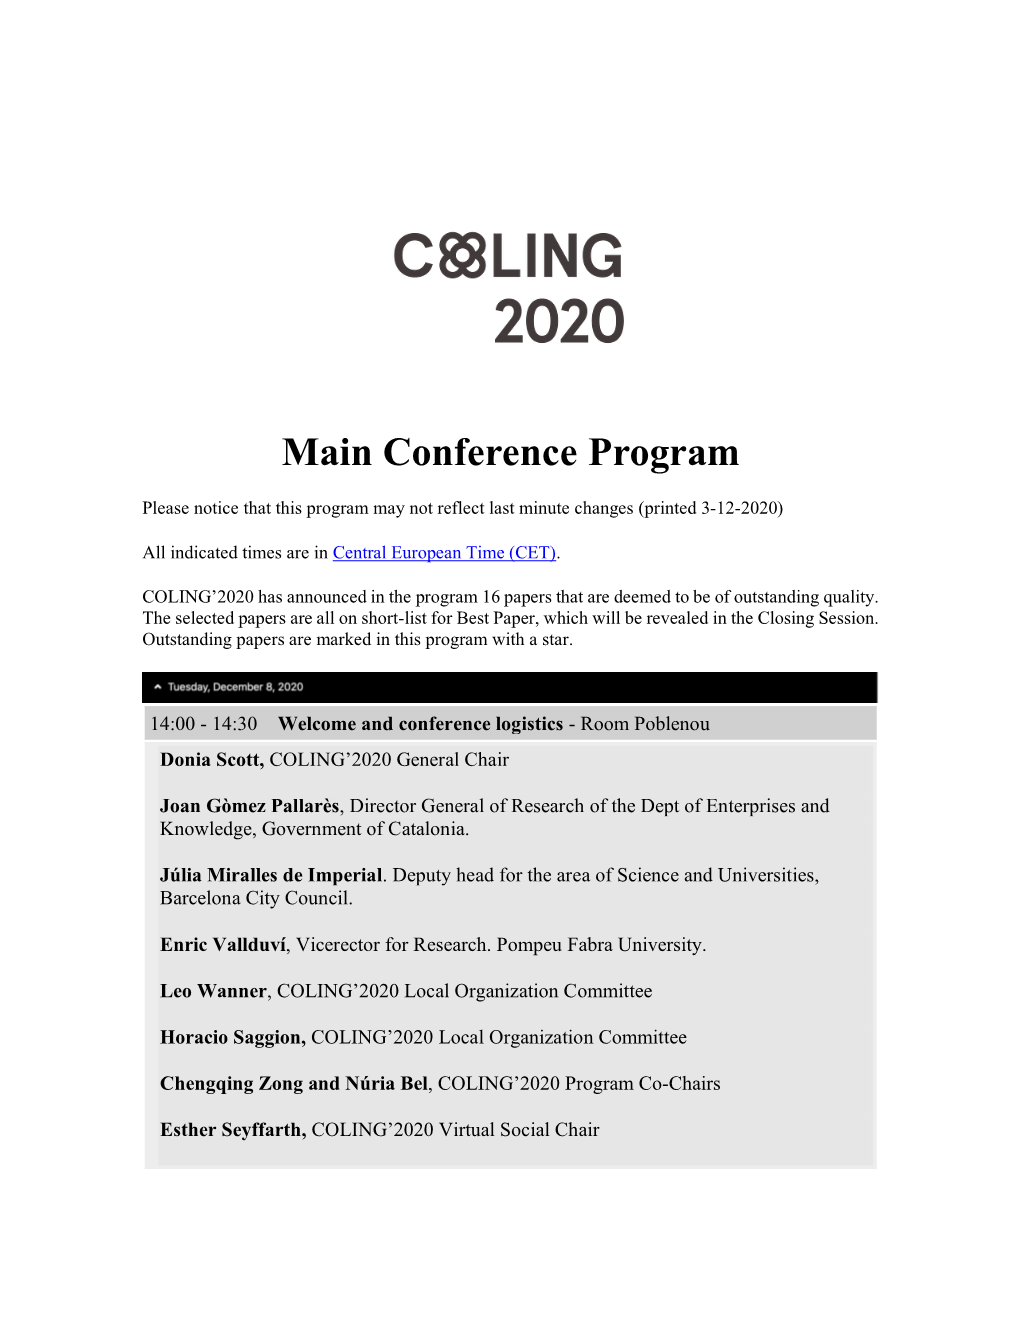 Programme | COLING'2020